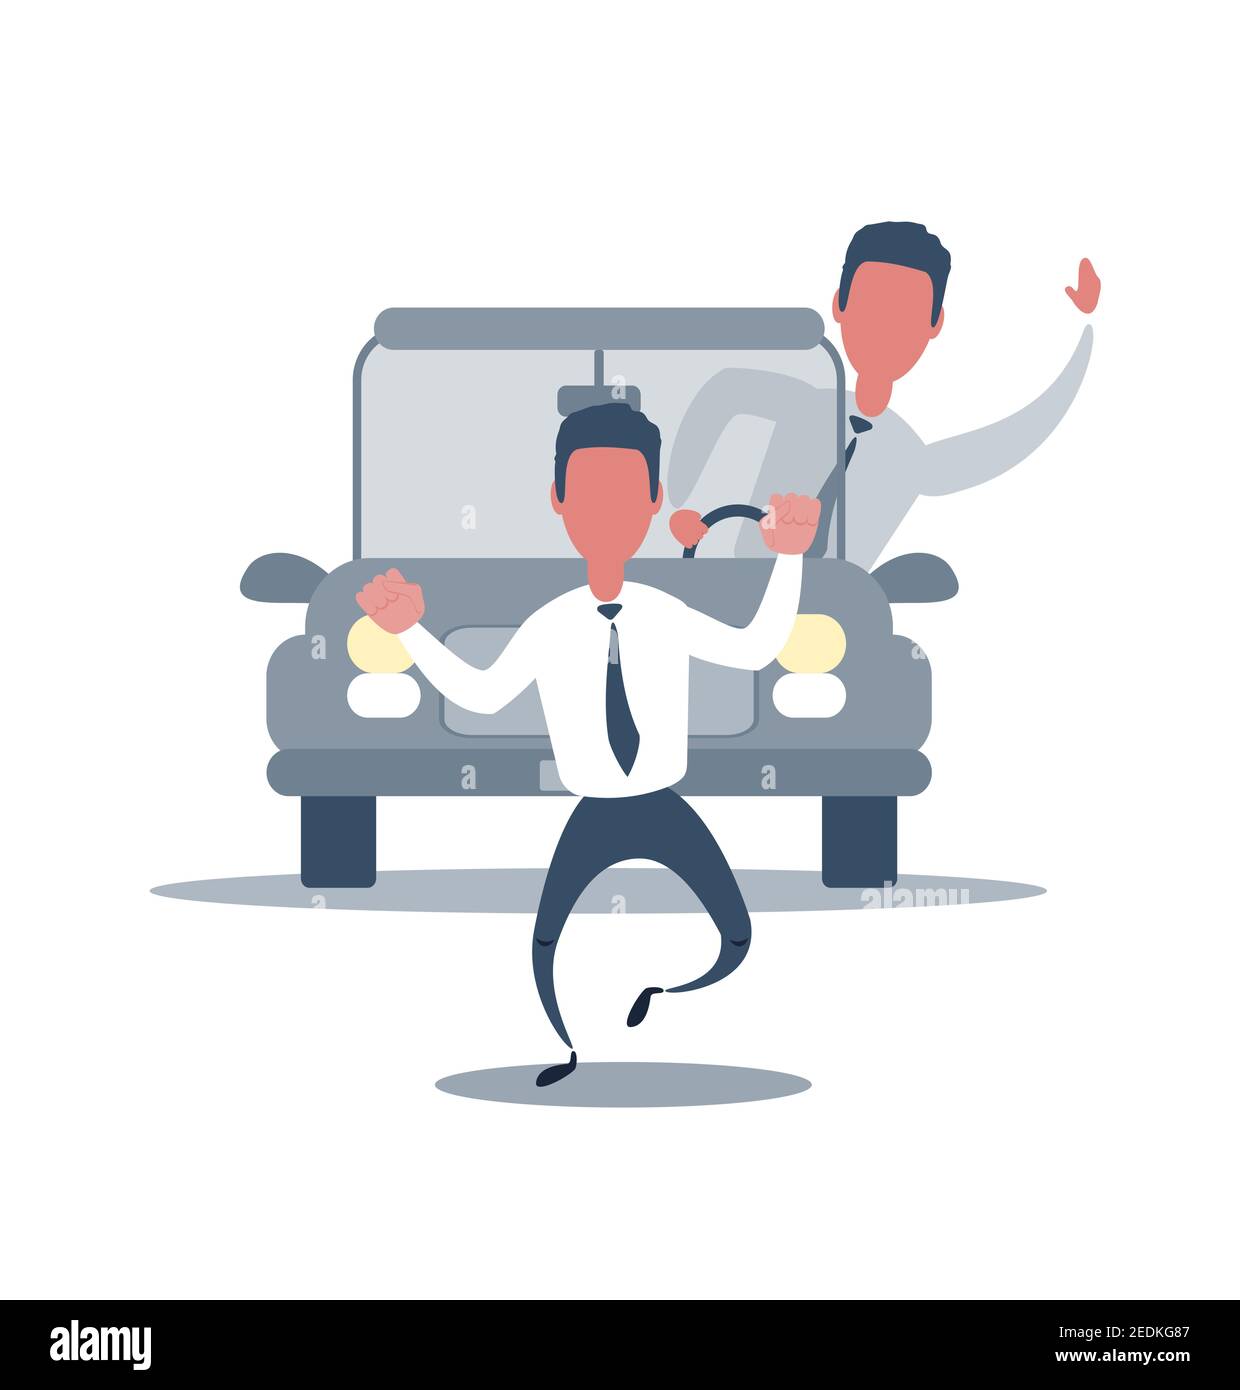 Car driver emergency brakes in front of pedestrian on road. Pedestrian crosses the road in the wrong place. Dangerous situation, traffic violation Stock Vector